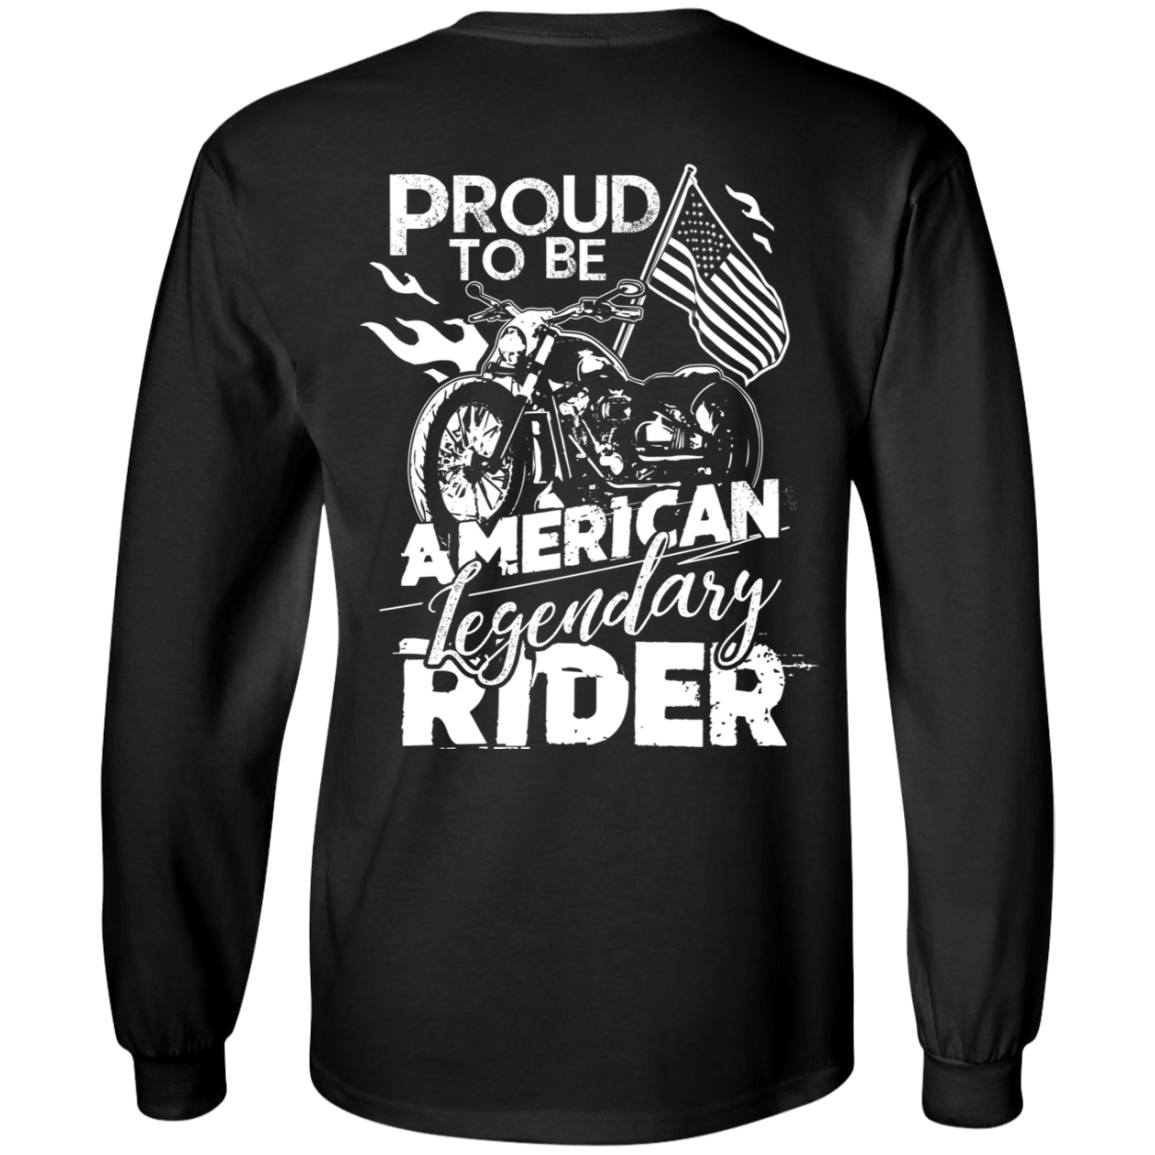 Proud to be American Legendary Rider  Long Sleeves